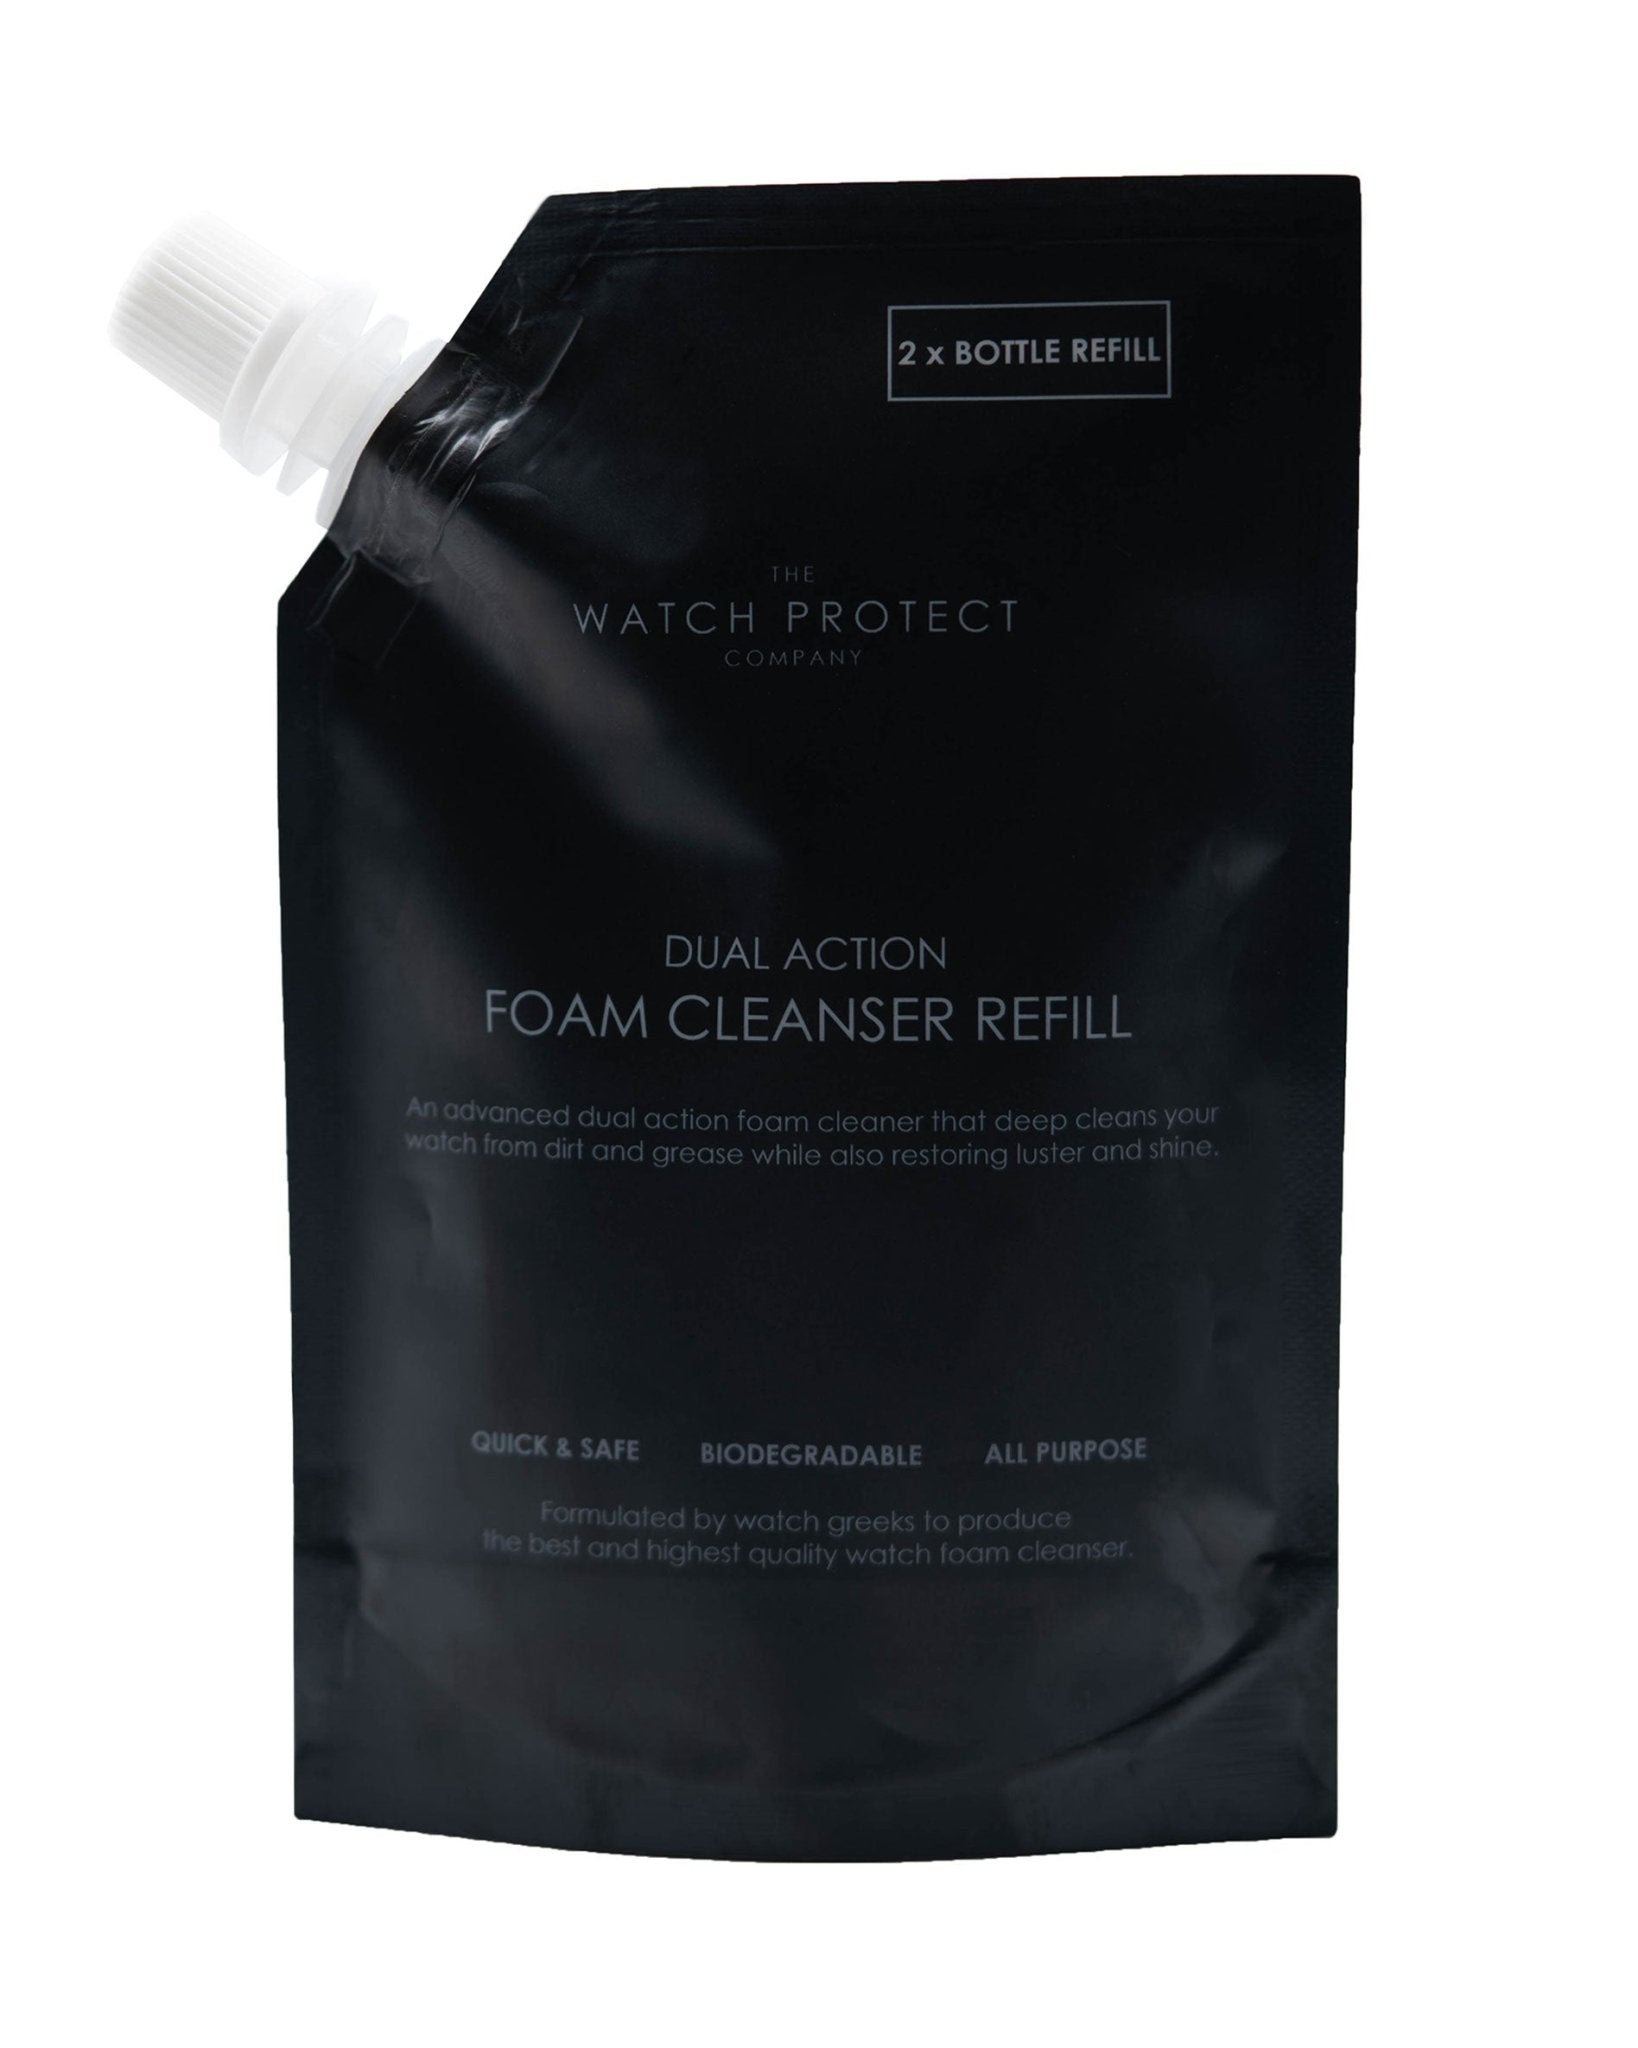 Dual Action Foam Cleanser Dual Action Foam Cleanser Refill Pouch 100ml - The Watch Protect Company